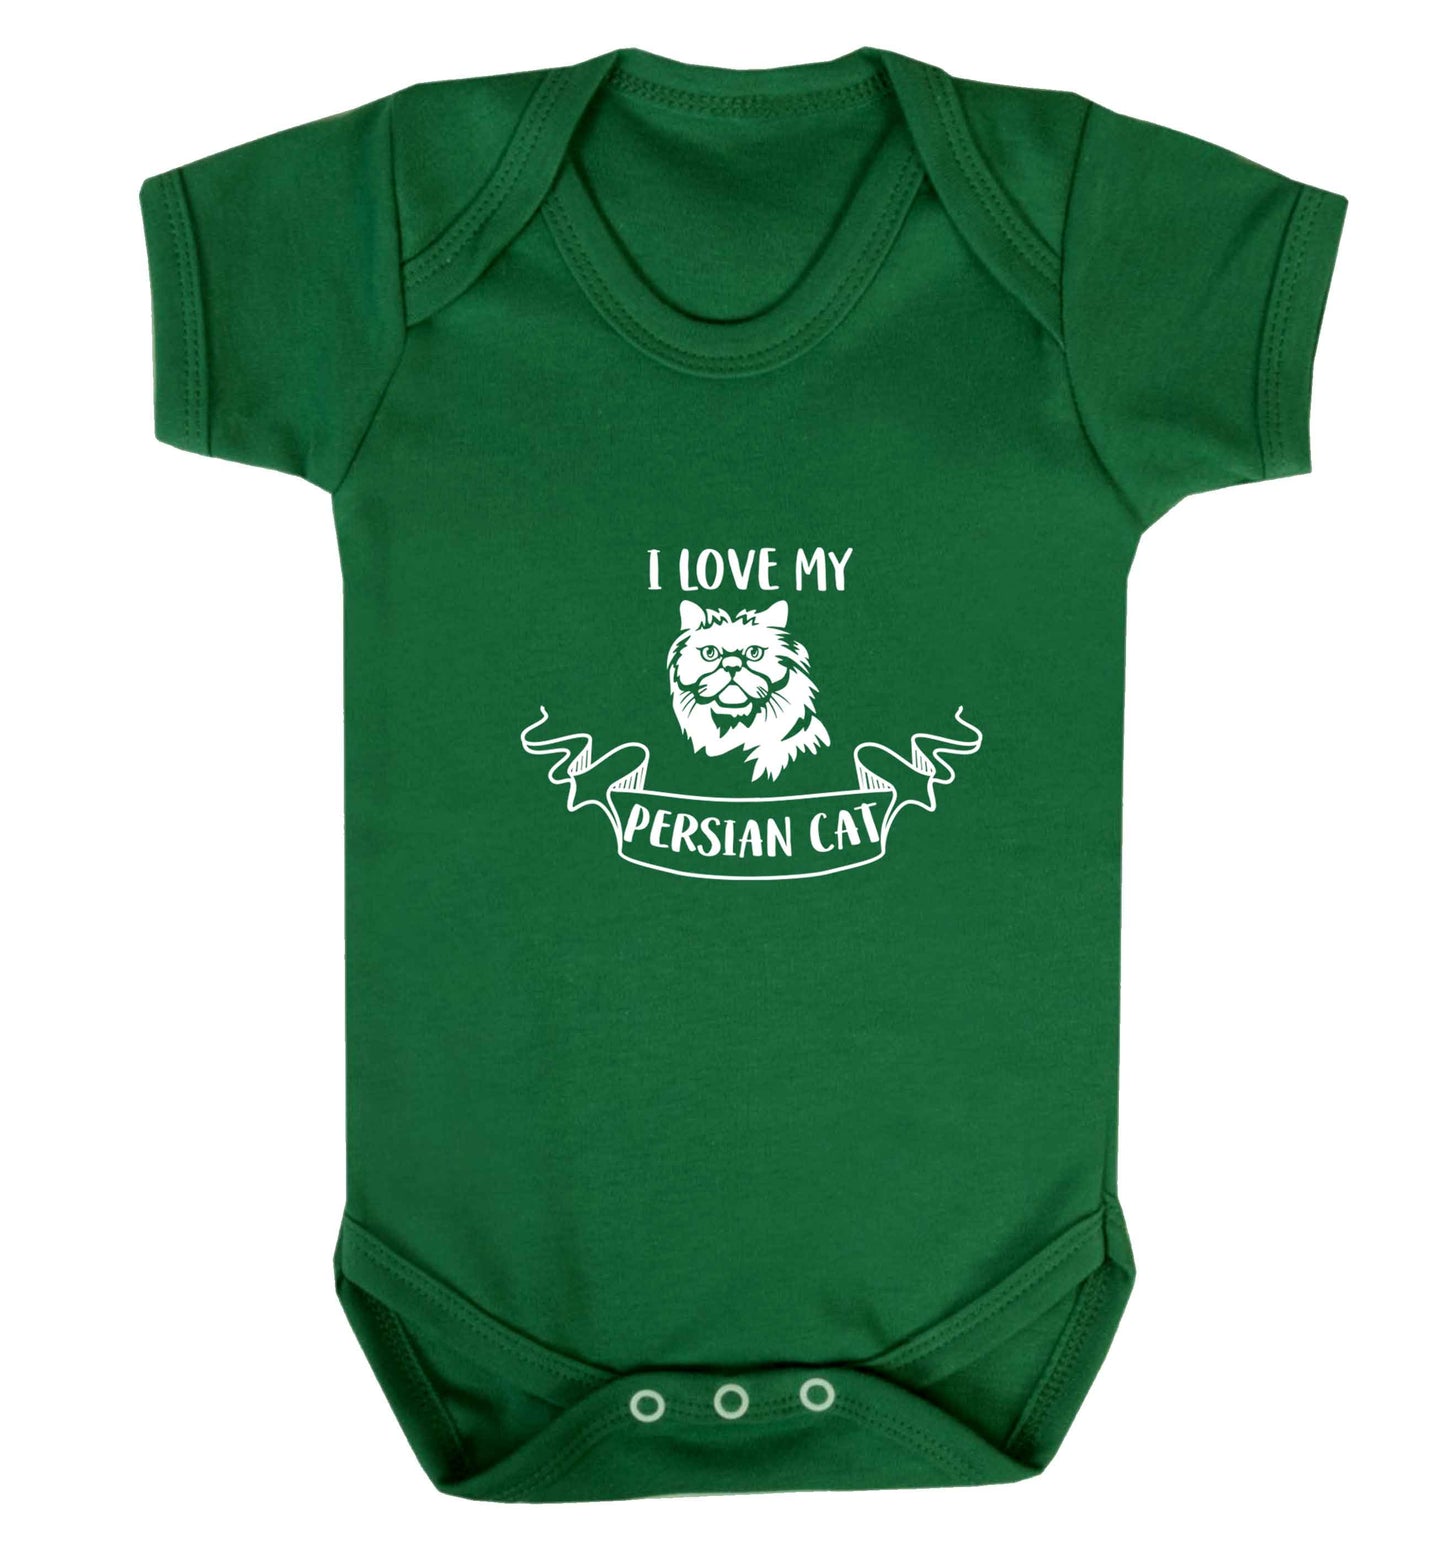 I love my persian cat baby vest green 18-24 months